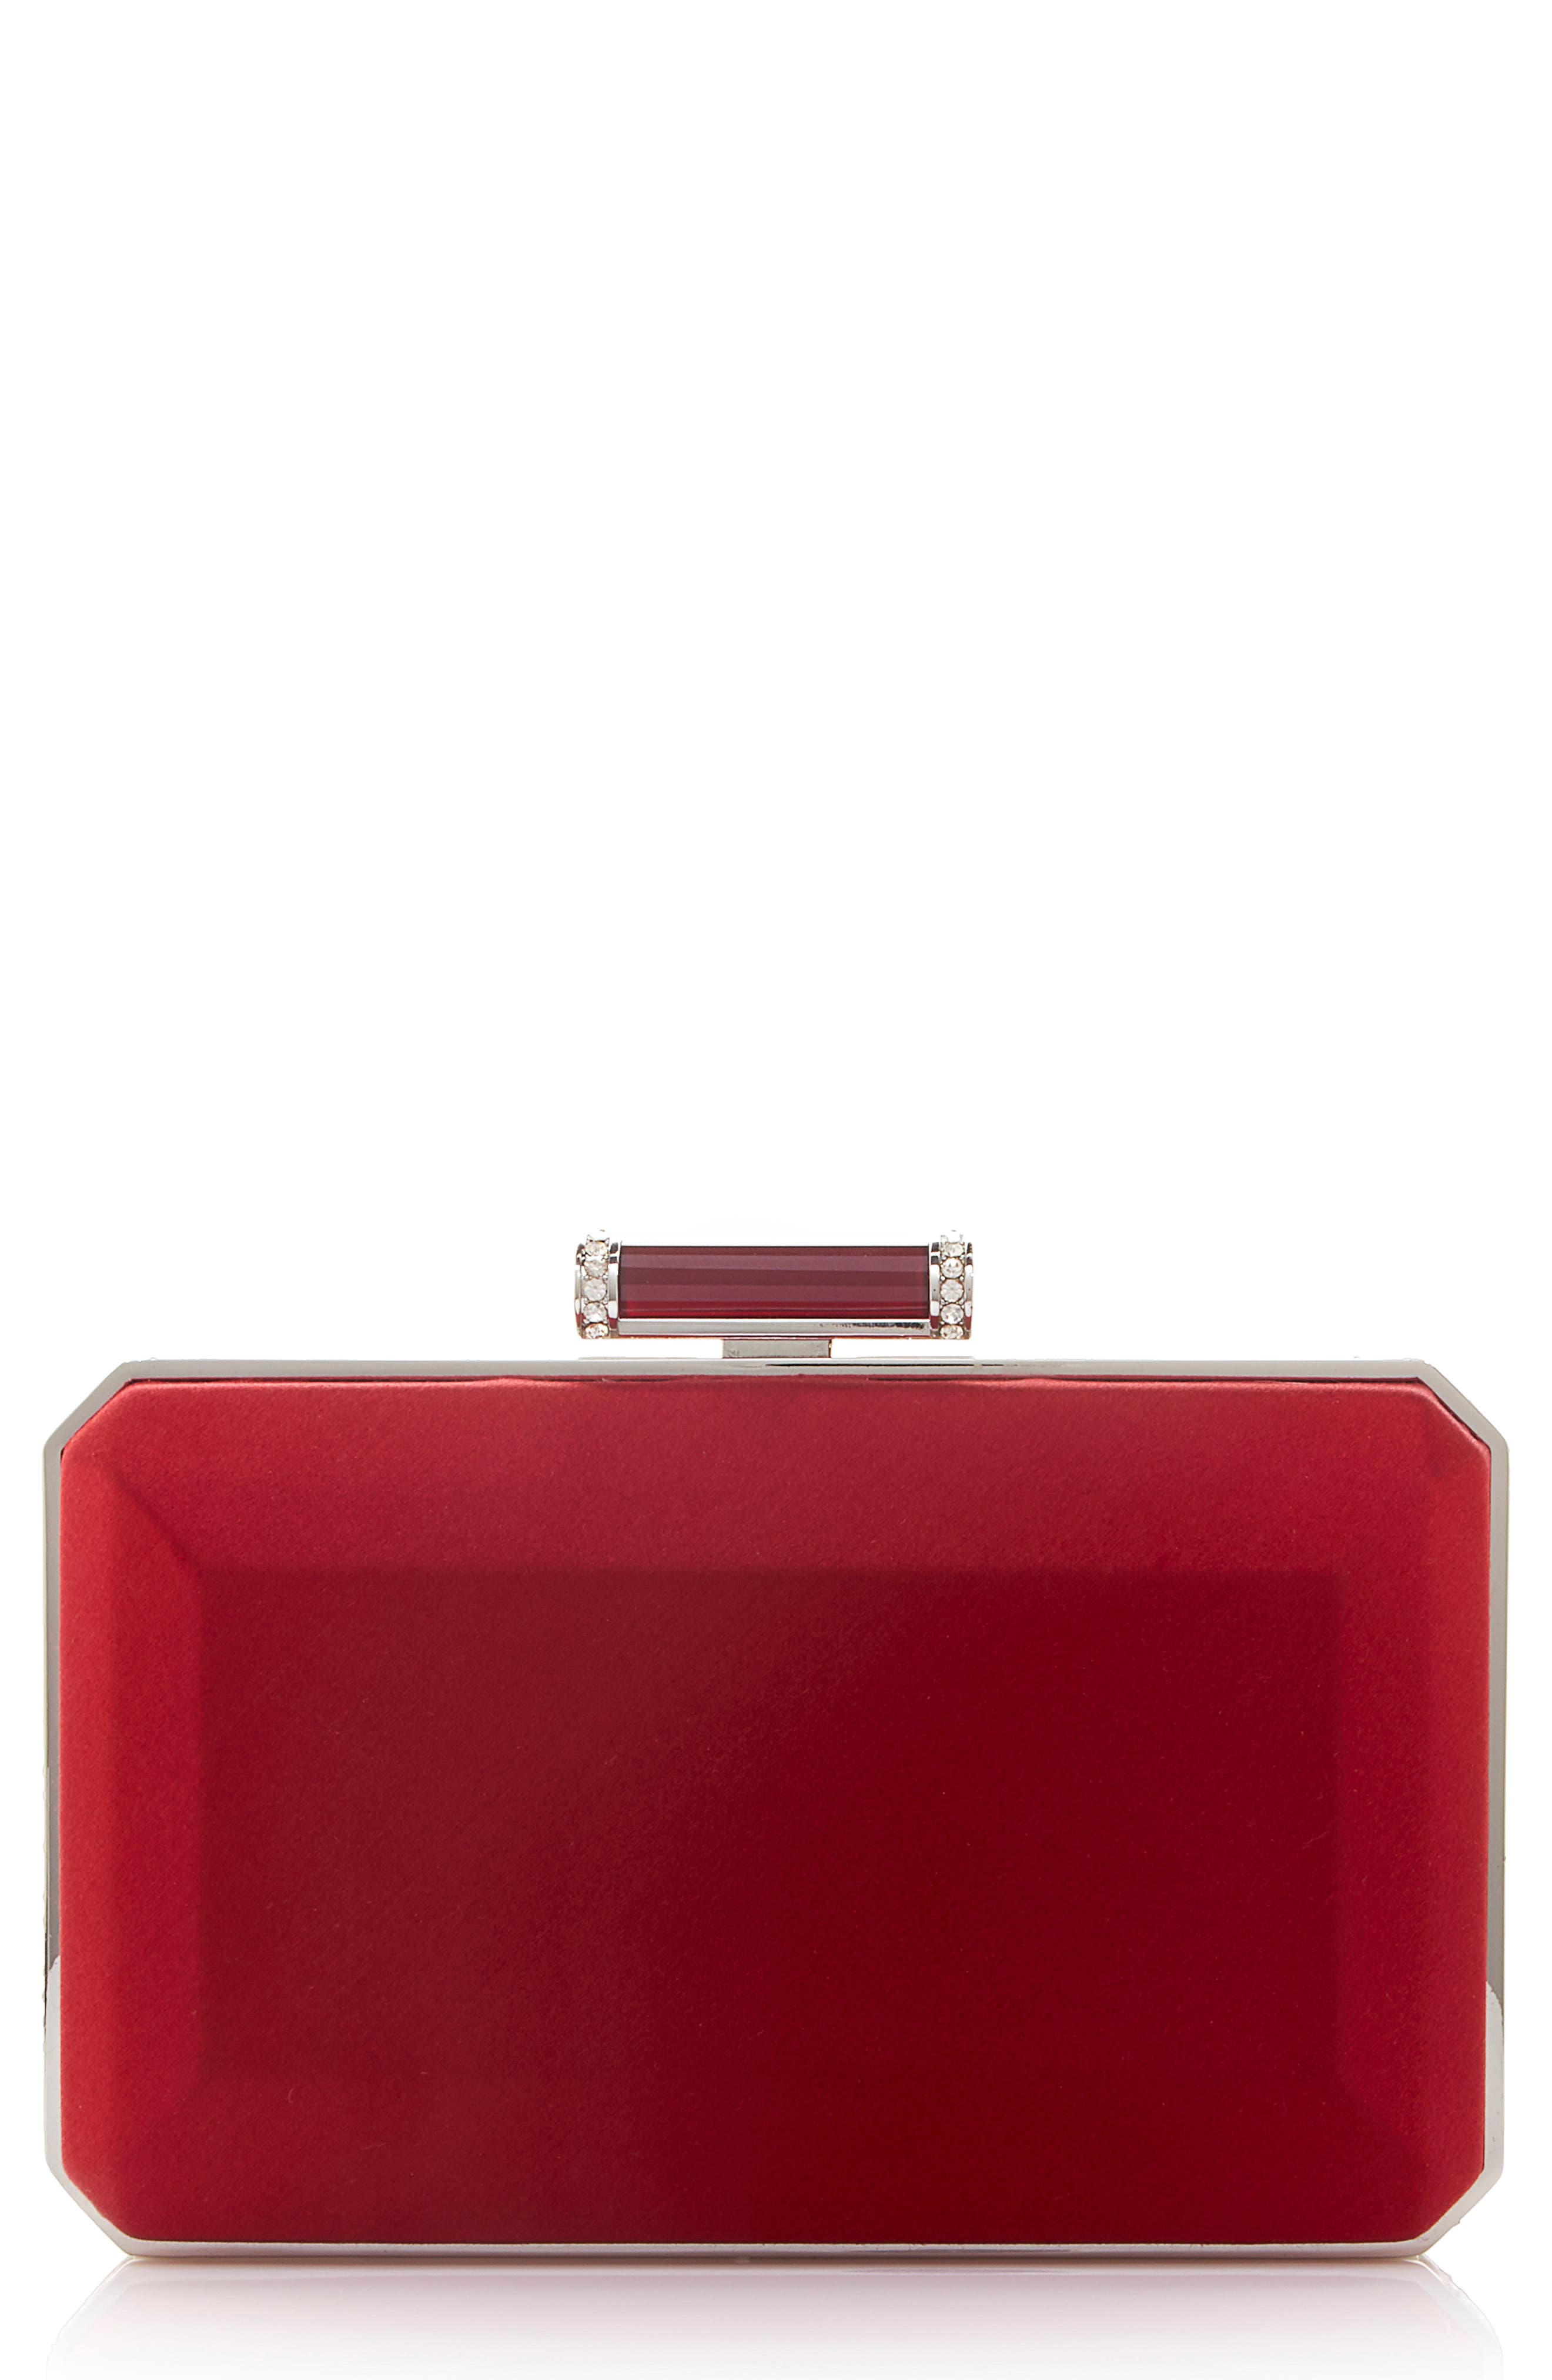 Judith Leiber Couture Soho Satin Frame Clutch in Silver Red at Nordstrom